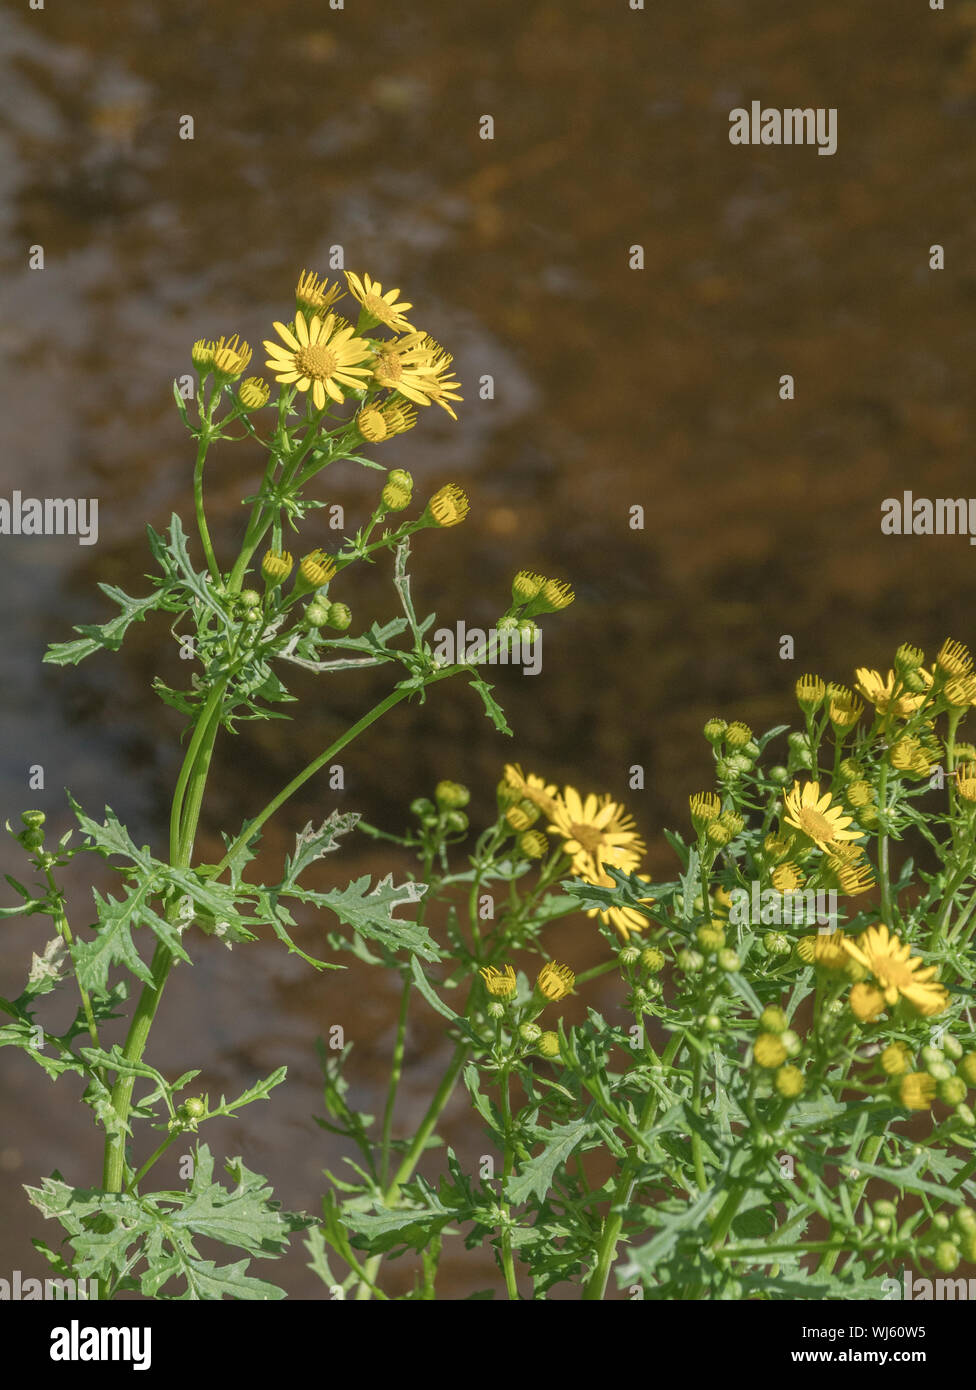 Yellow flowers of Common Ragwort / Jacobaea vulgaris of Asteraceae family growing by river. An injurious troublesome agricultural weed under Weeds Act Stock Photo